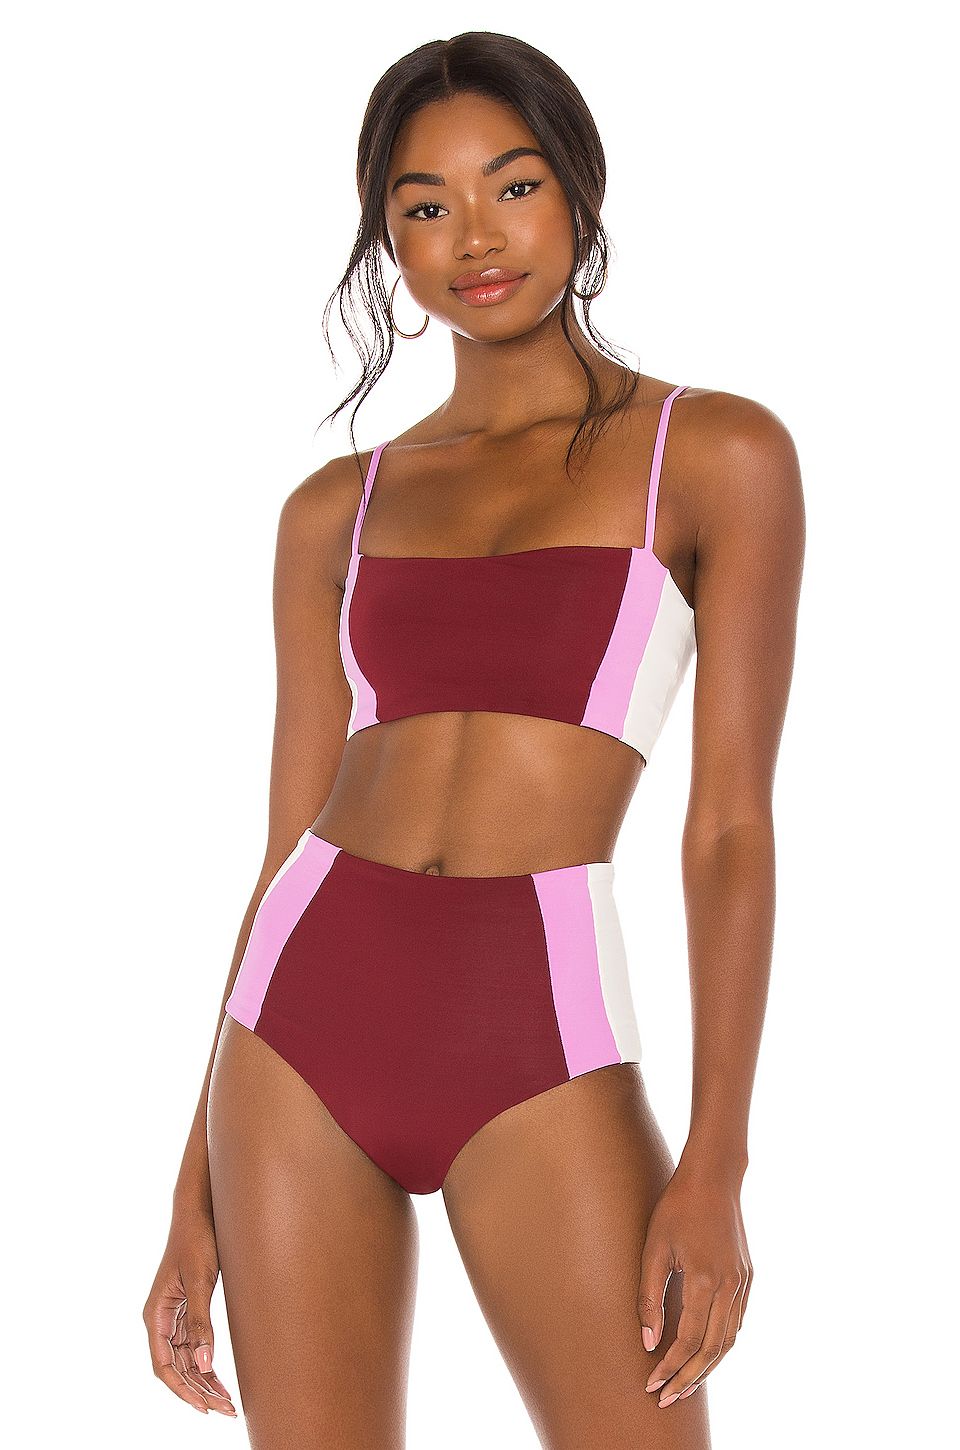 best bathing suits for flat chest